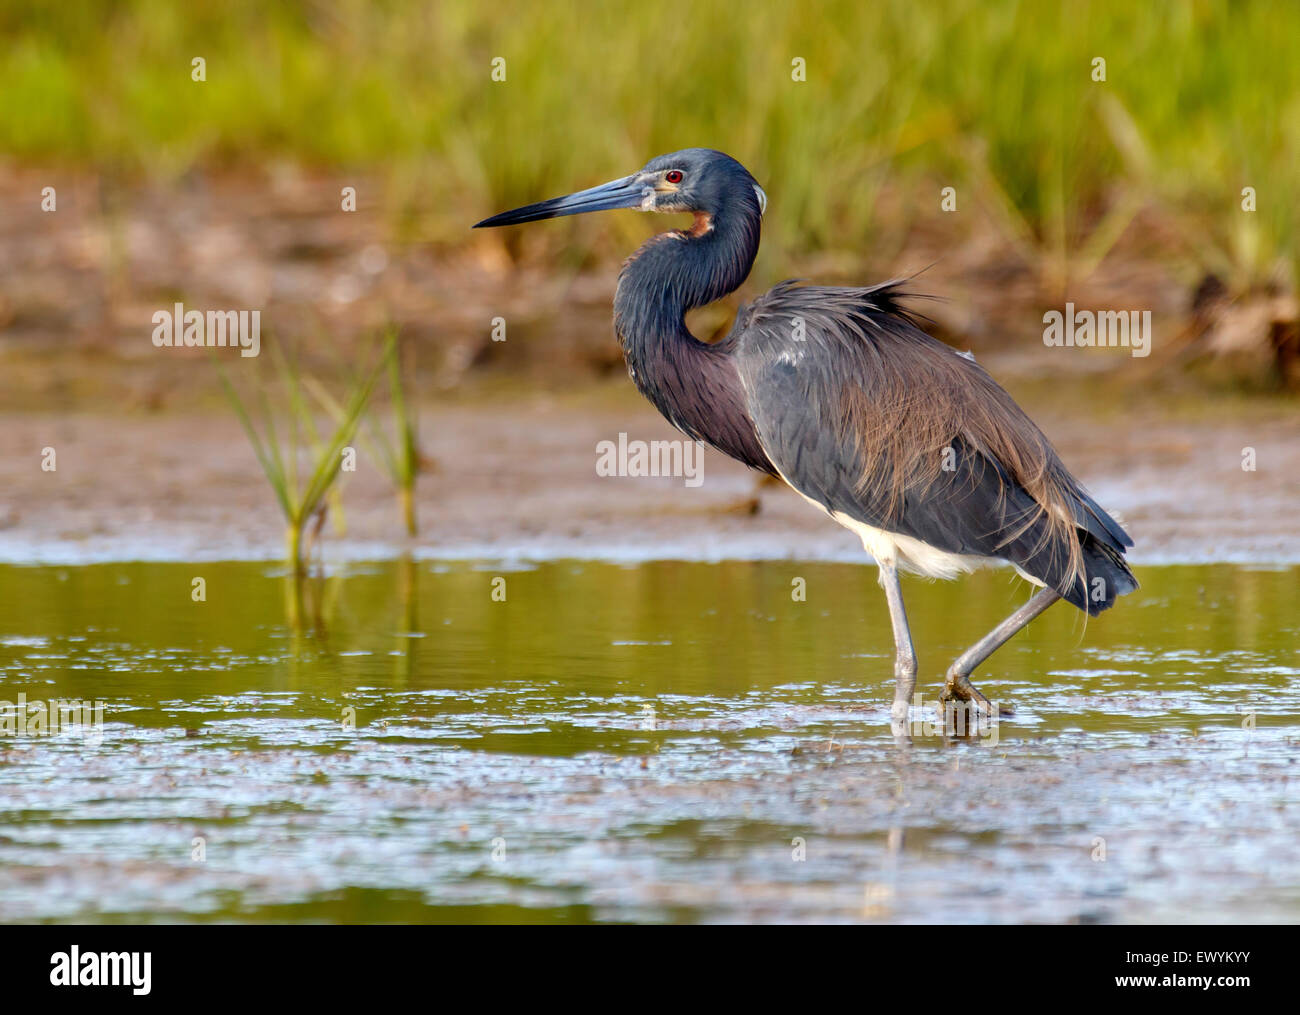 Tri-colored Heron standing on water Stock Photo